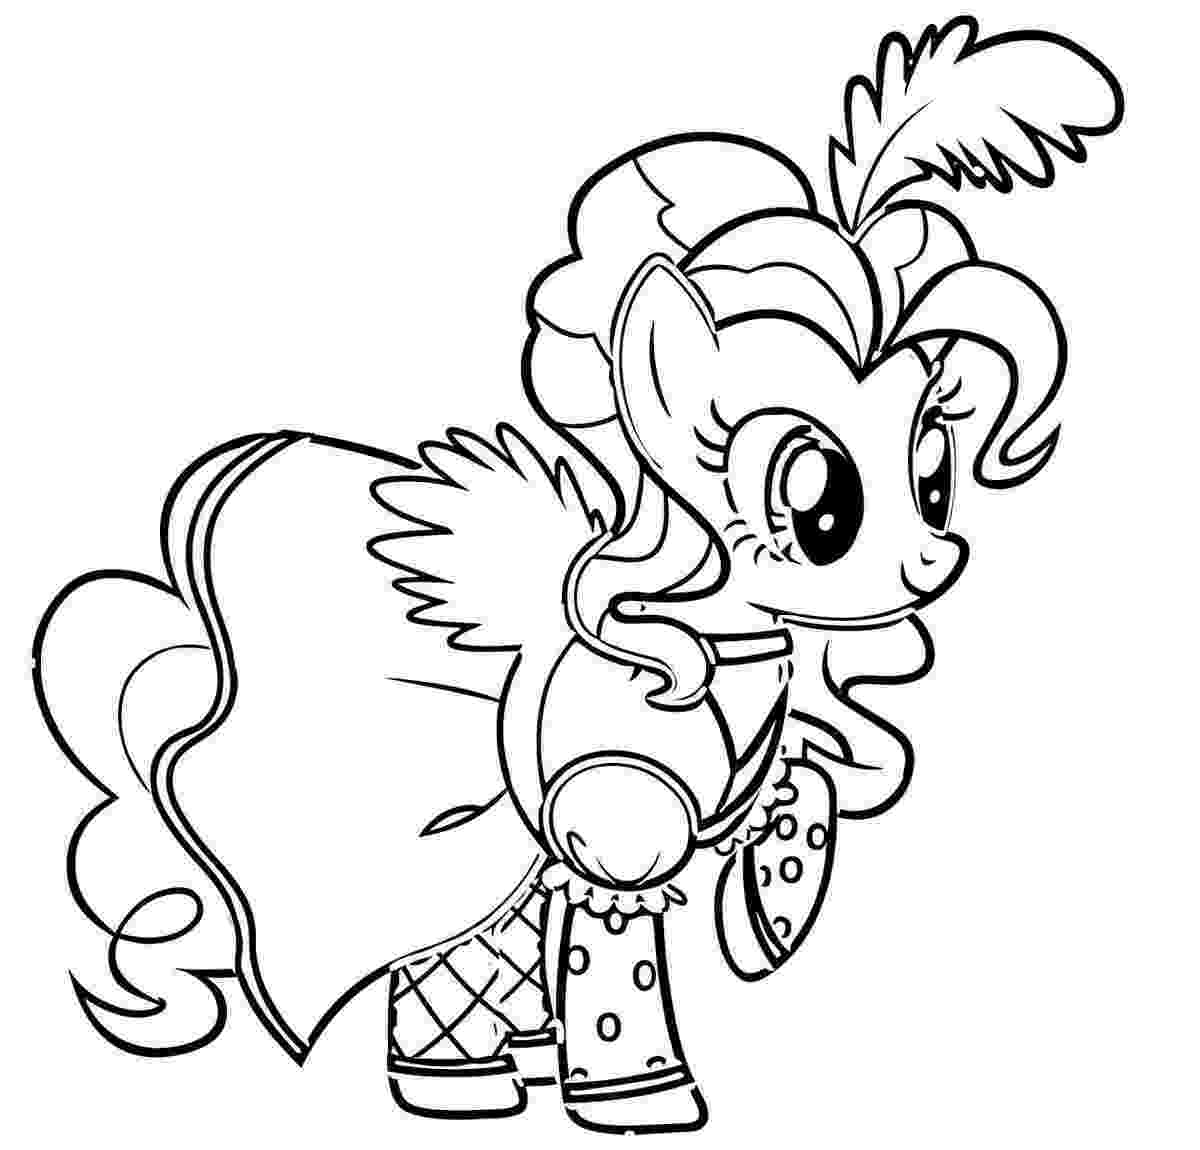 coloring pages of my little pony my little pony coloring pages of pony pages coloring little my 